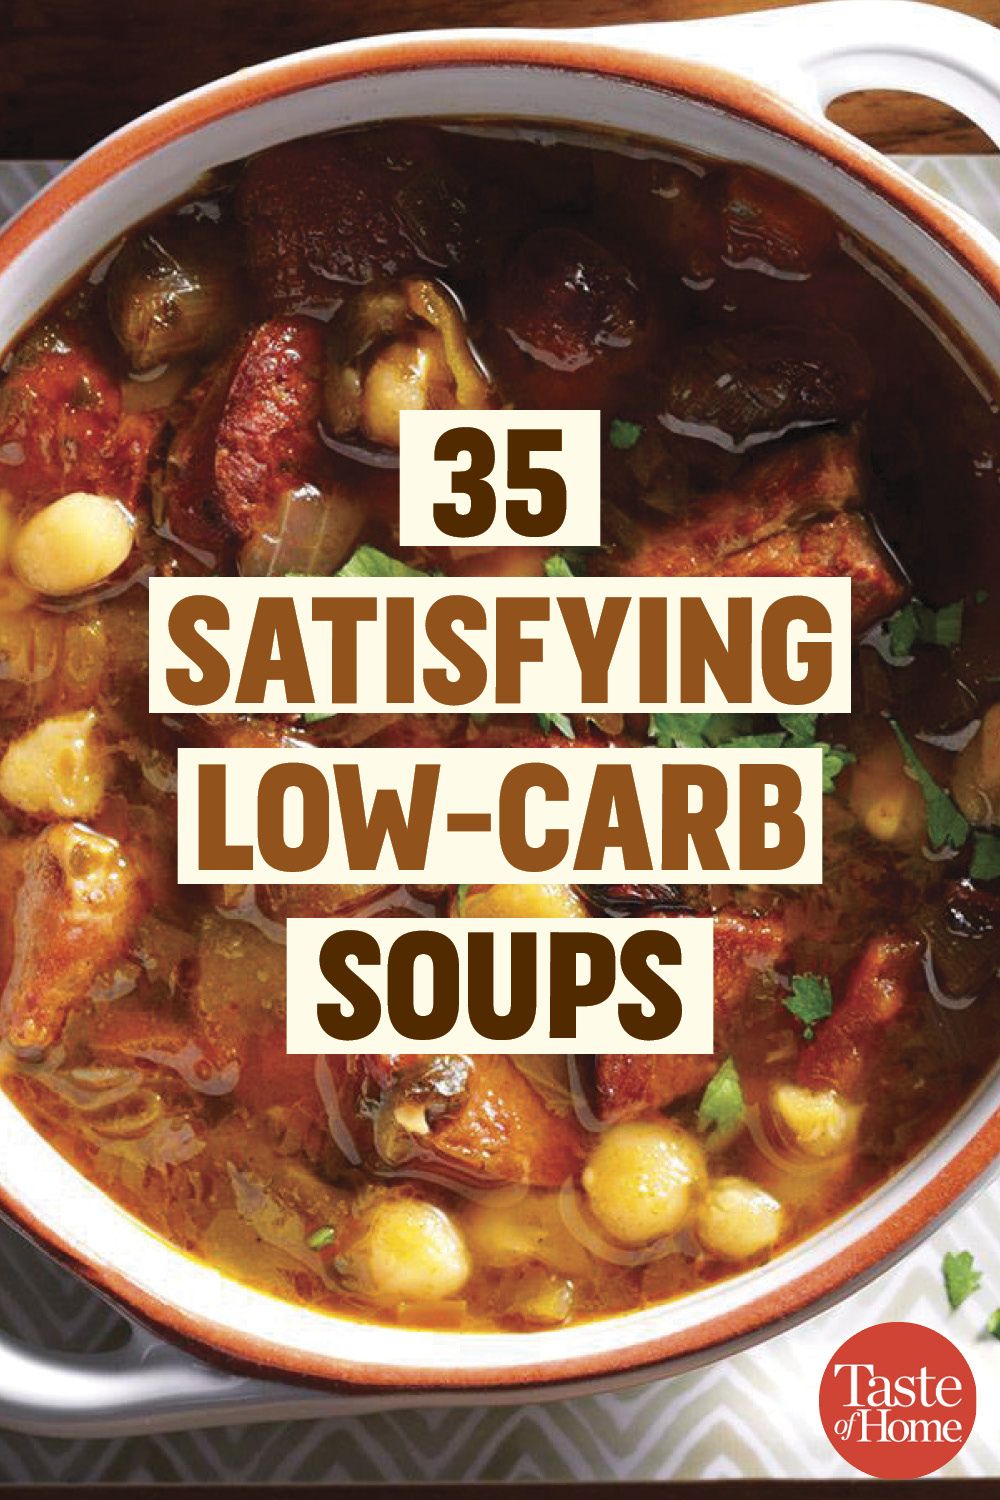 45 Satisfying Low-Carb Soup Recipes for Chilly Nights